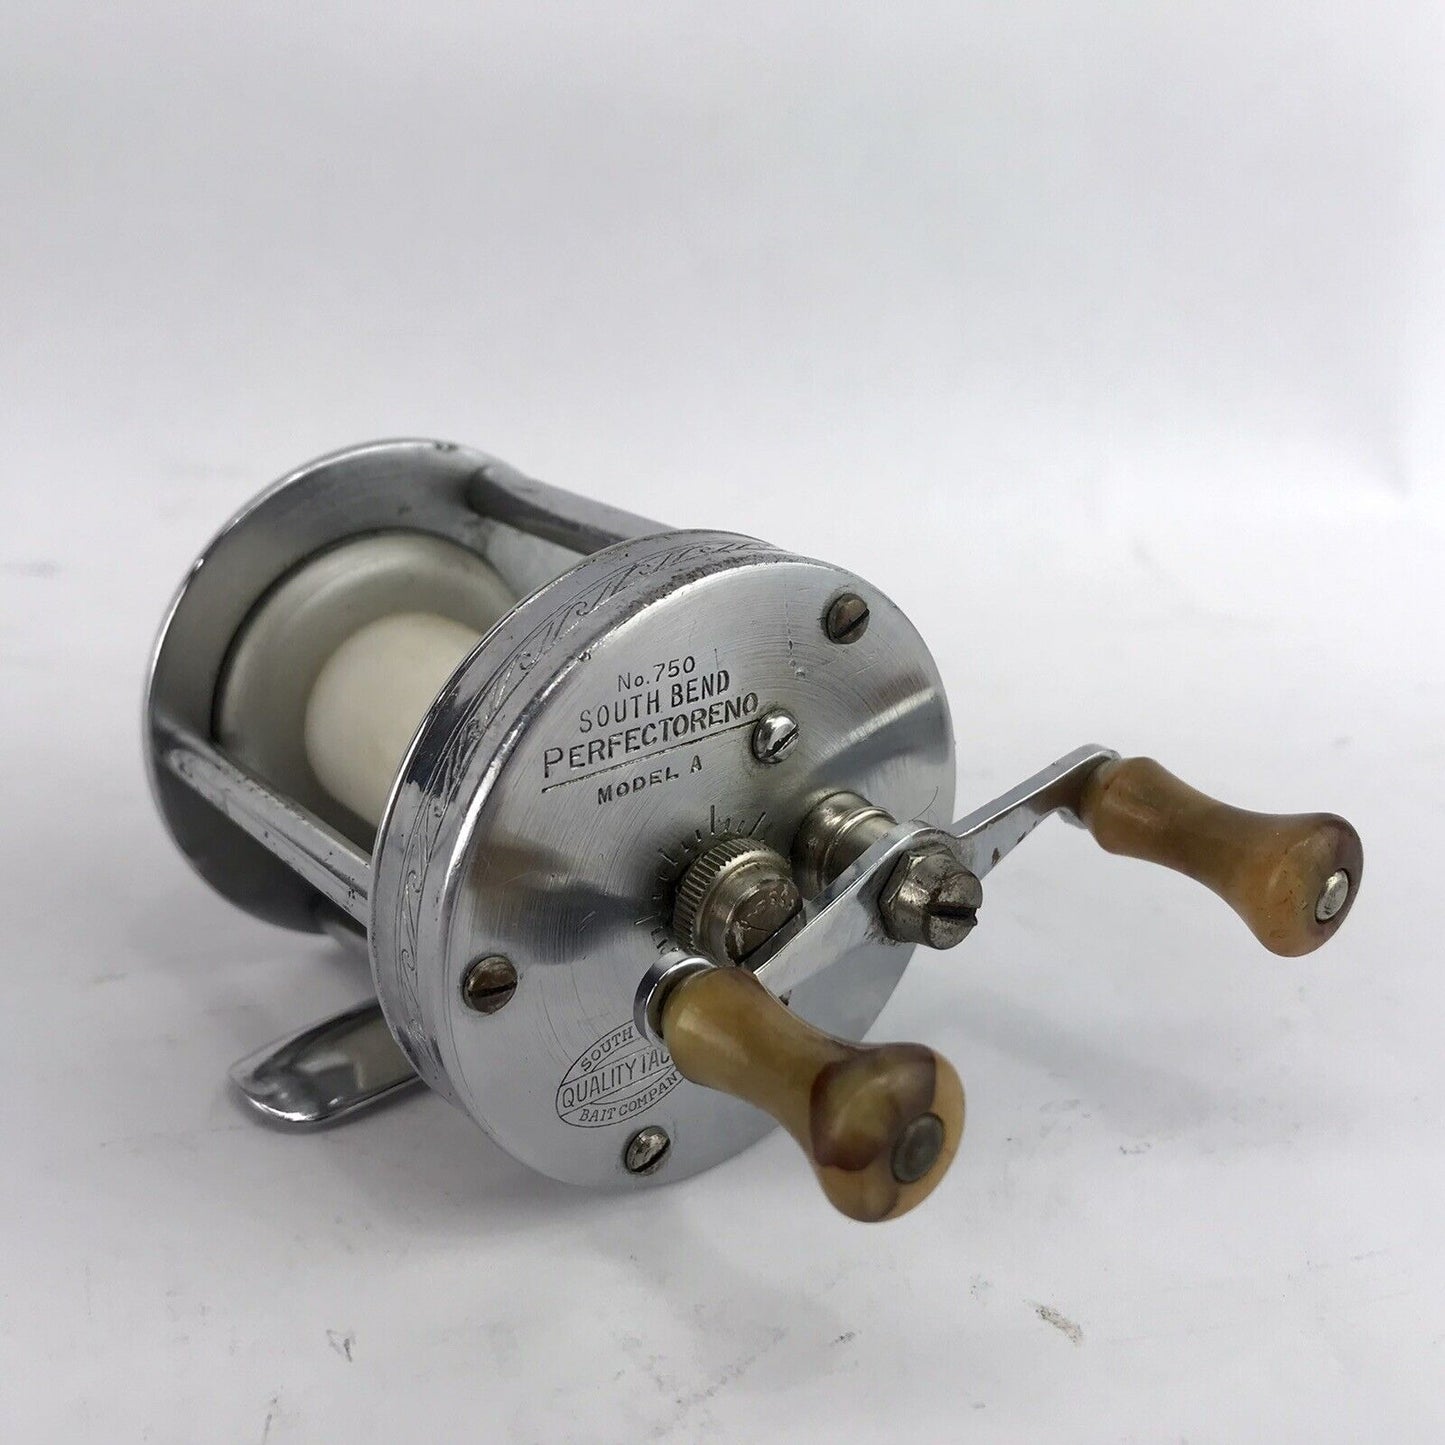 Vintage SOUTH BEND PERFECTORENO 750 LEVEL WINDING FISHING REEL Trolling  Trout